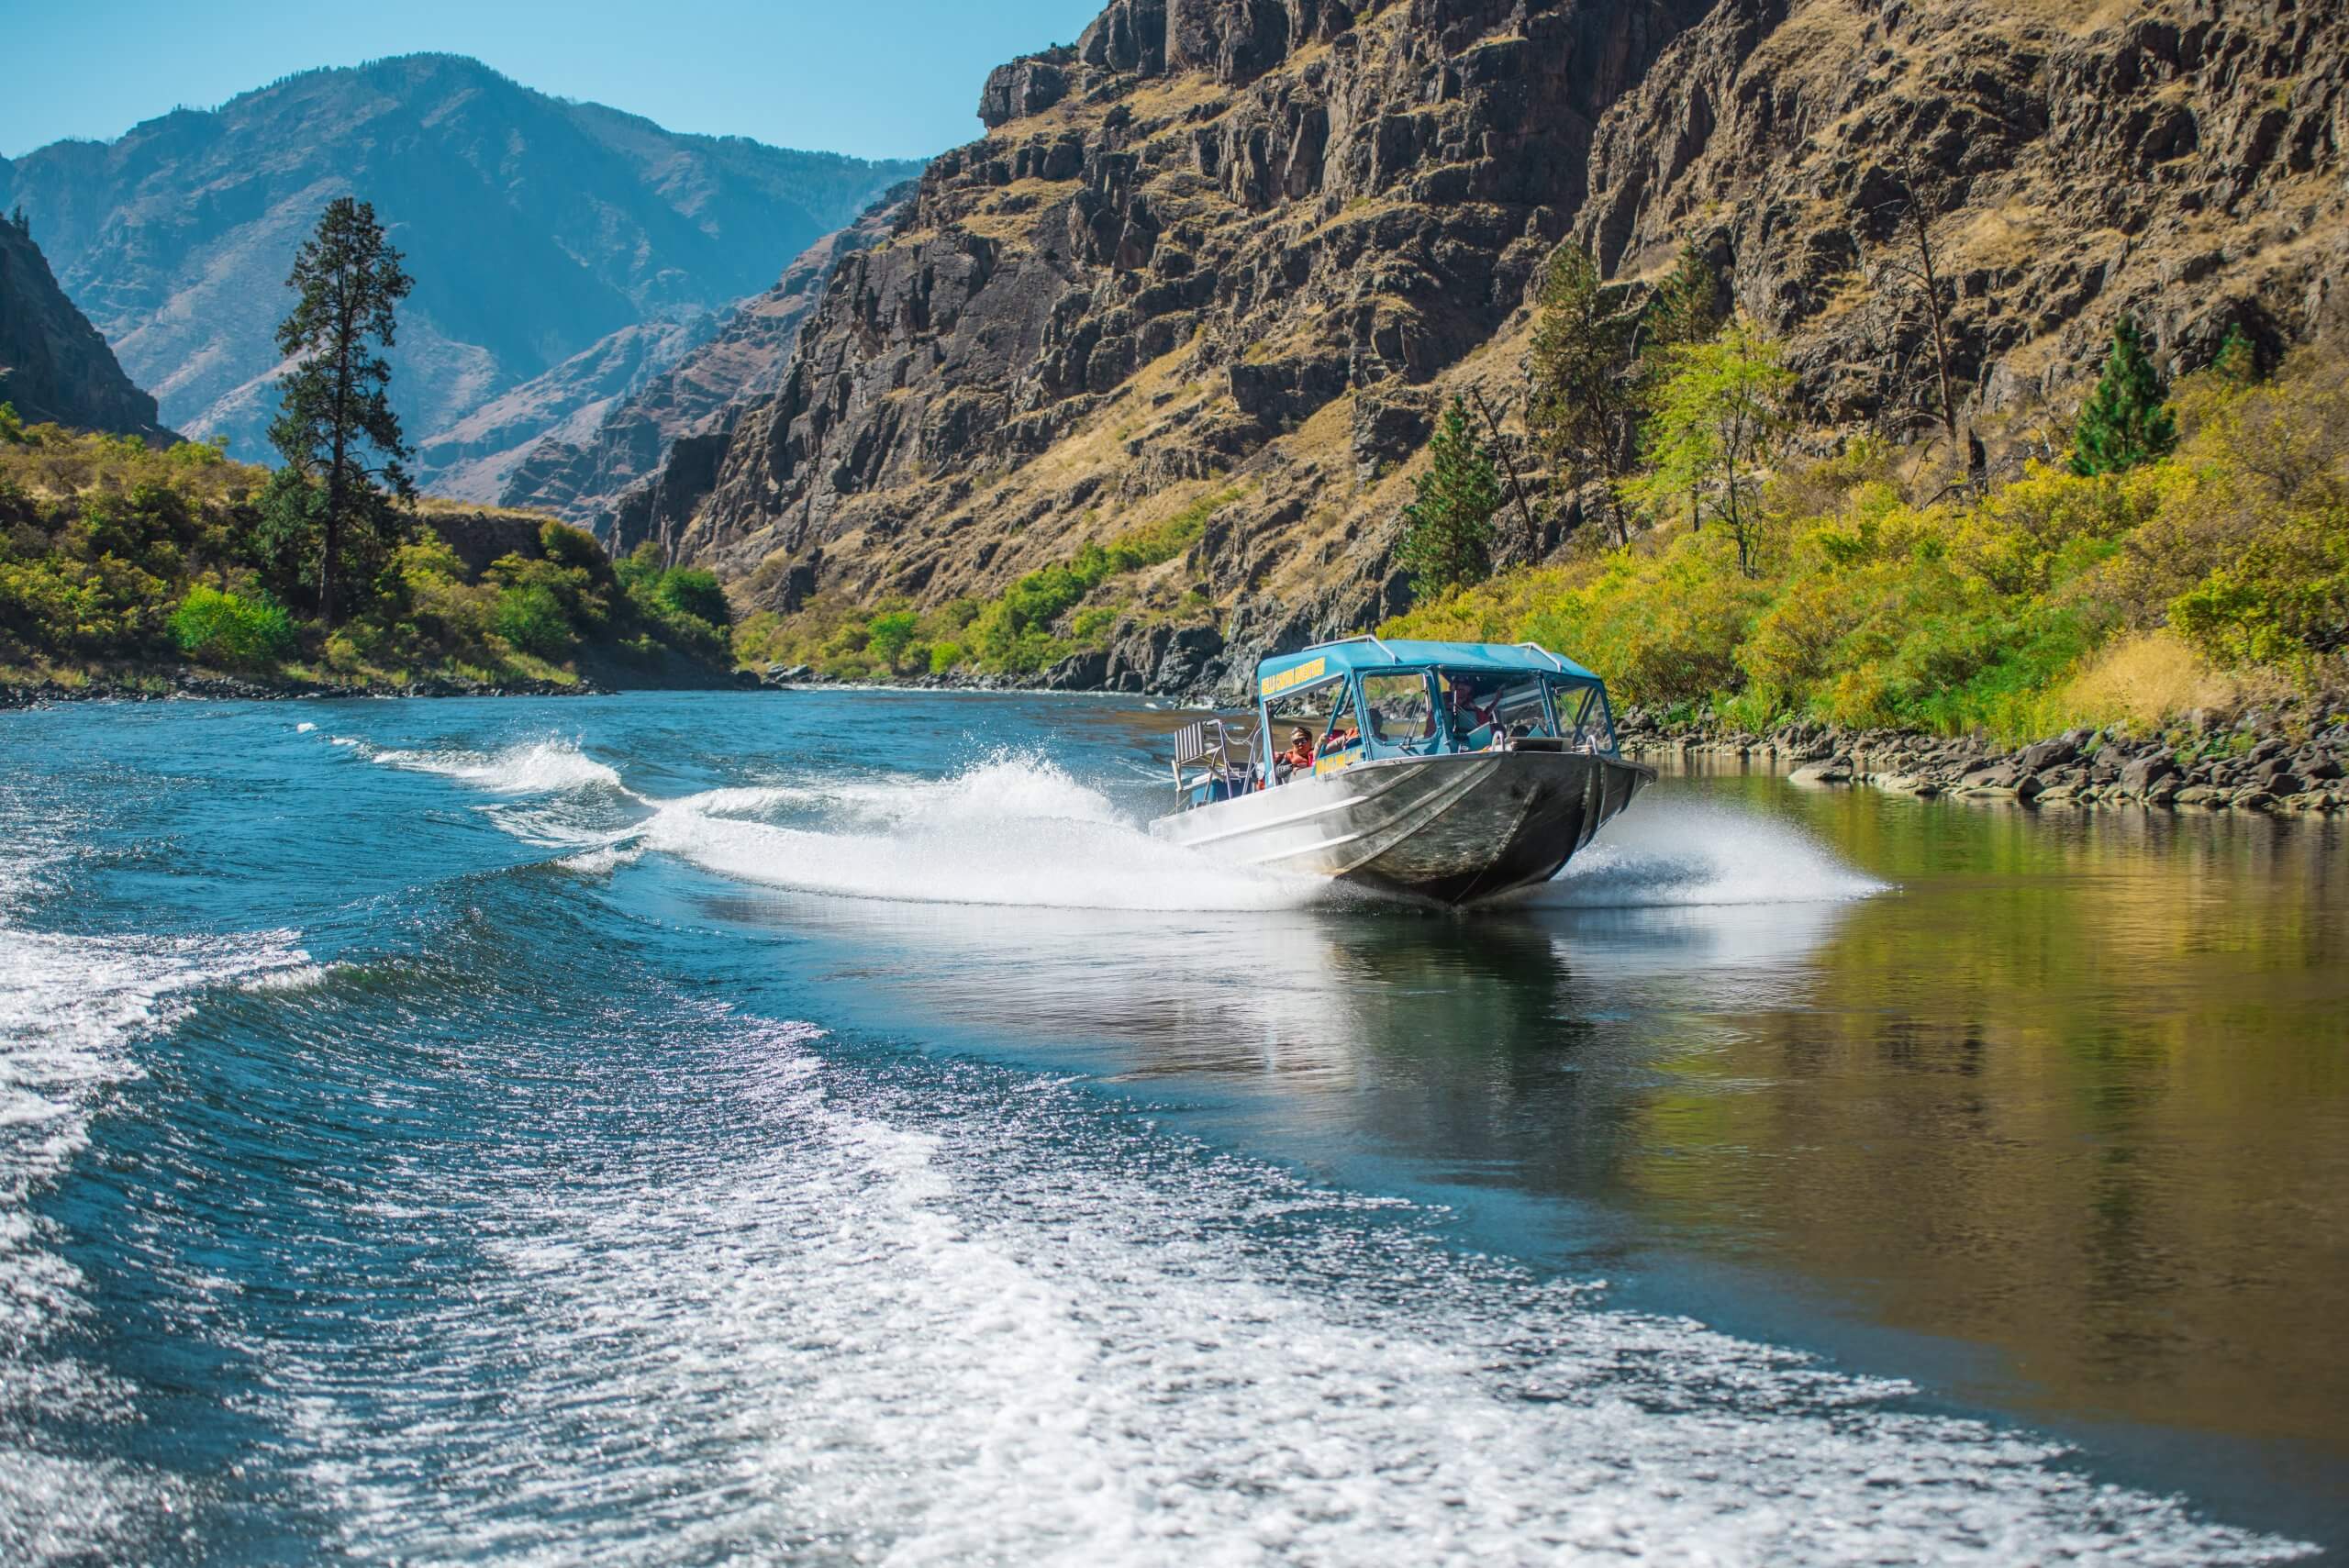 A blue jet boat cruising down a river between two canyon walls.